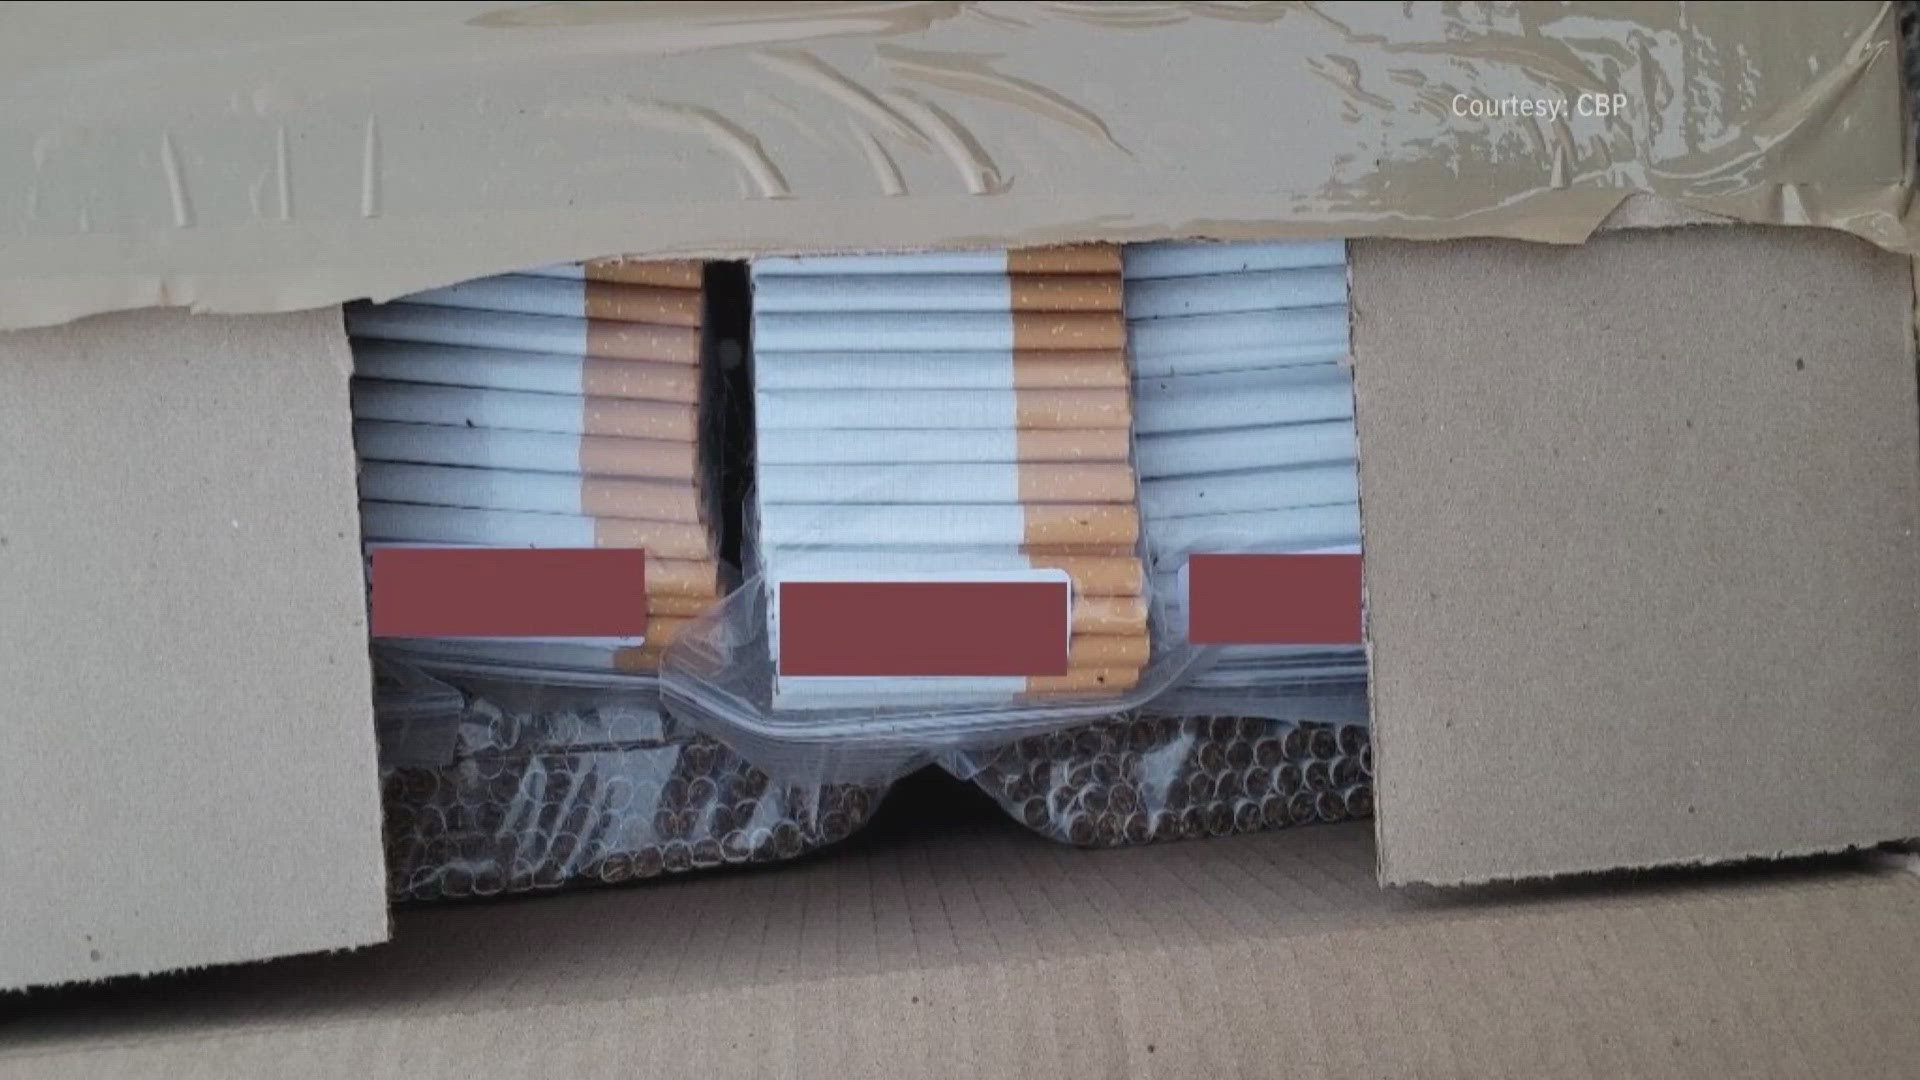 The U.S. Border Patrol Buffalo Sector says during a traffic stop they discovered more than 50 boxes that held more than one million non-compliant loose cigarettes.